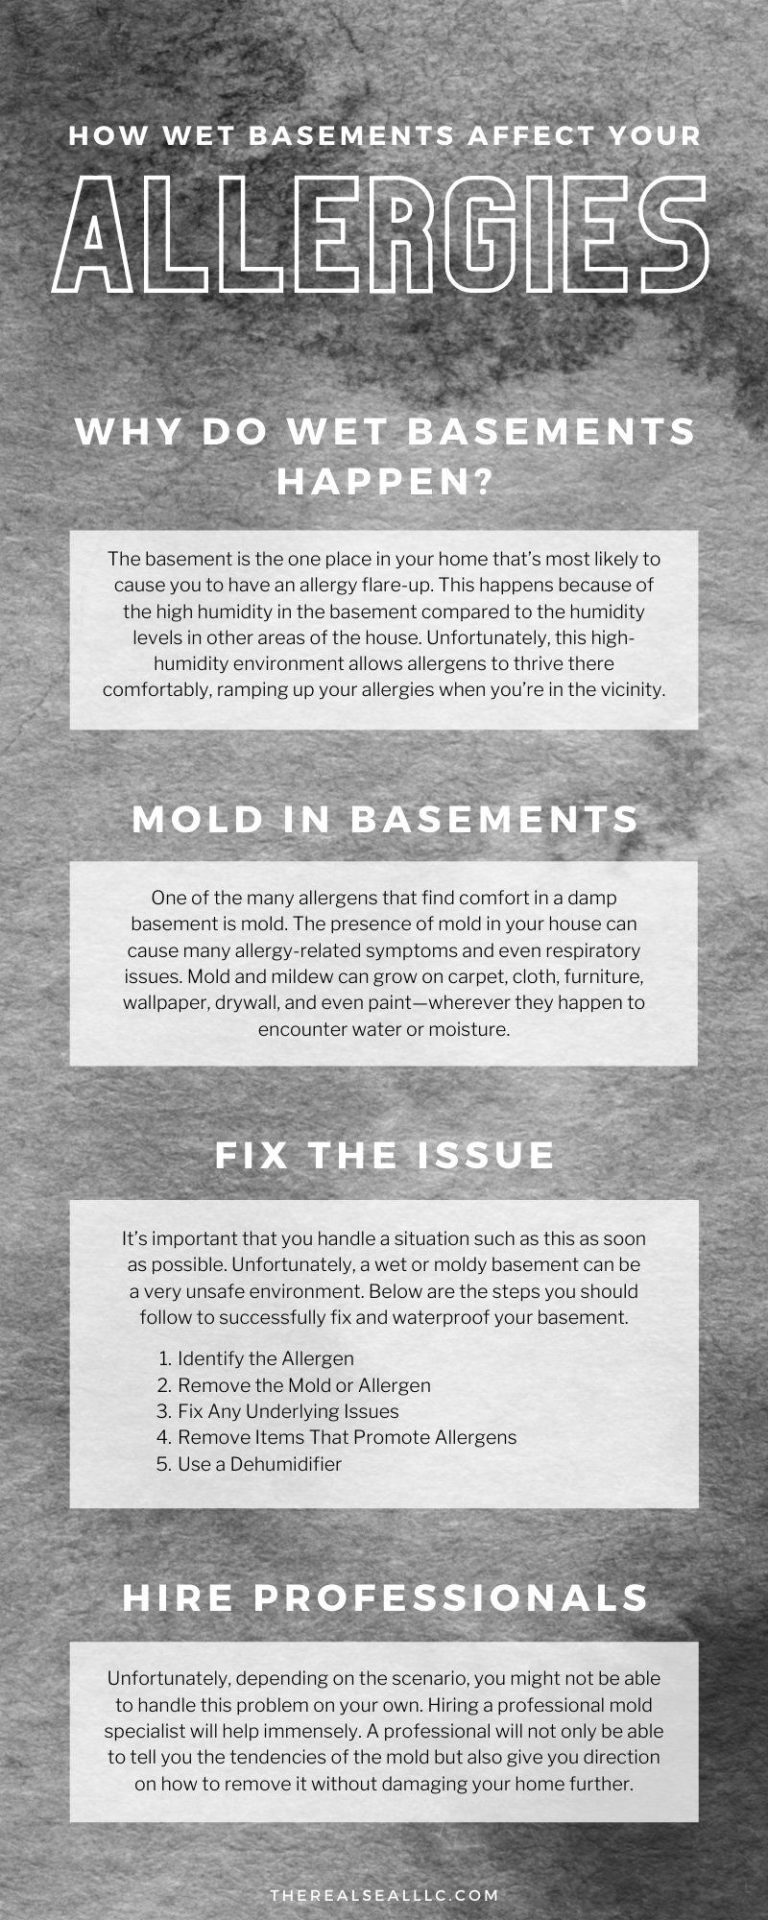 How Wet Basements Affect Your Allergies